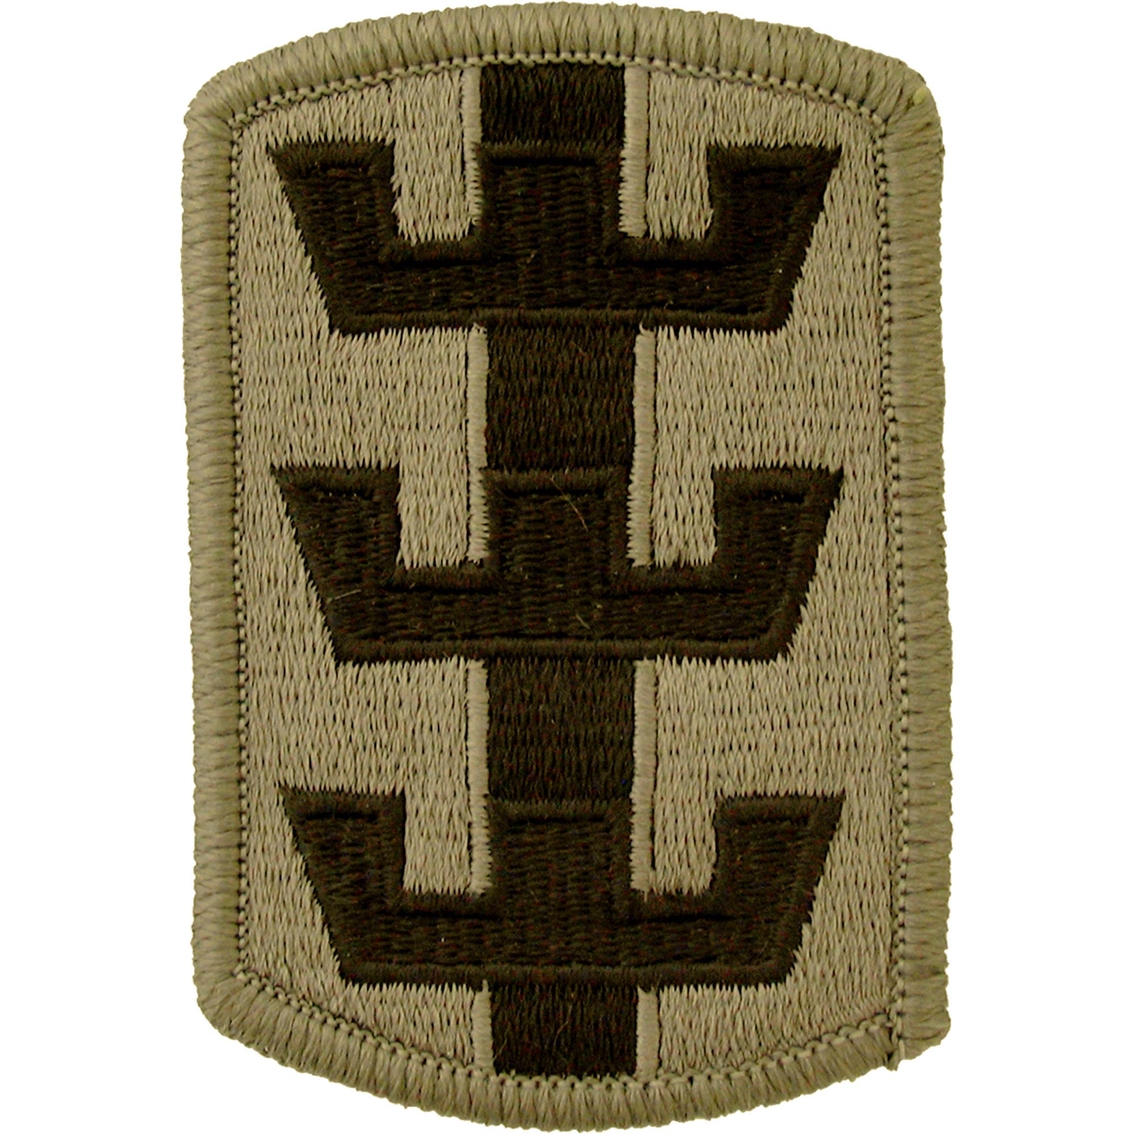 All Army Unit Patches